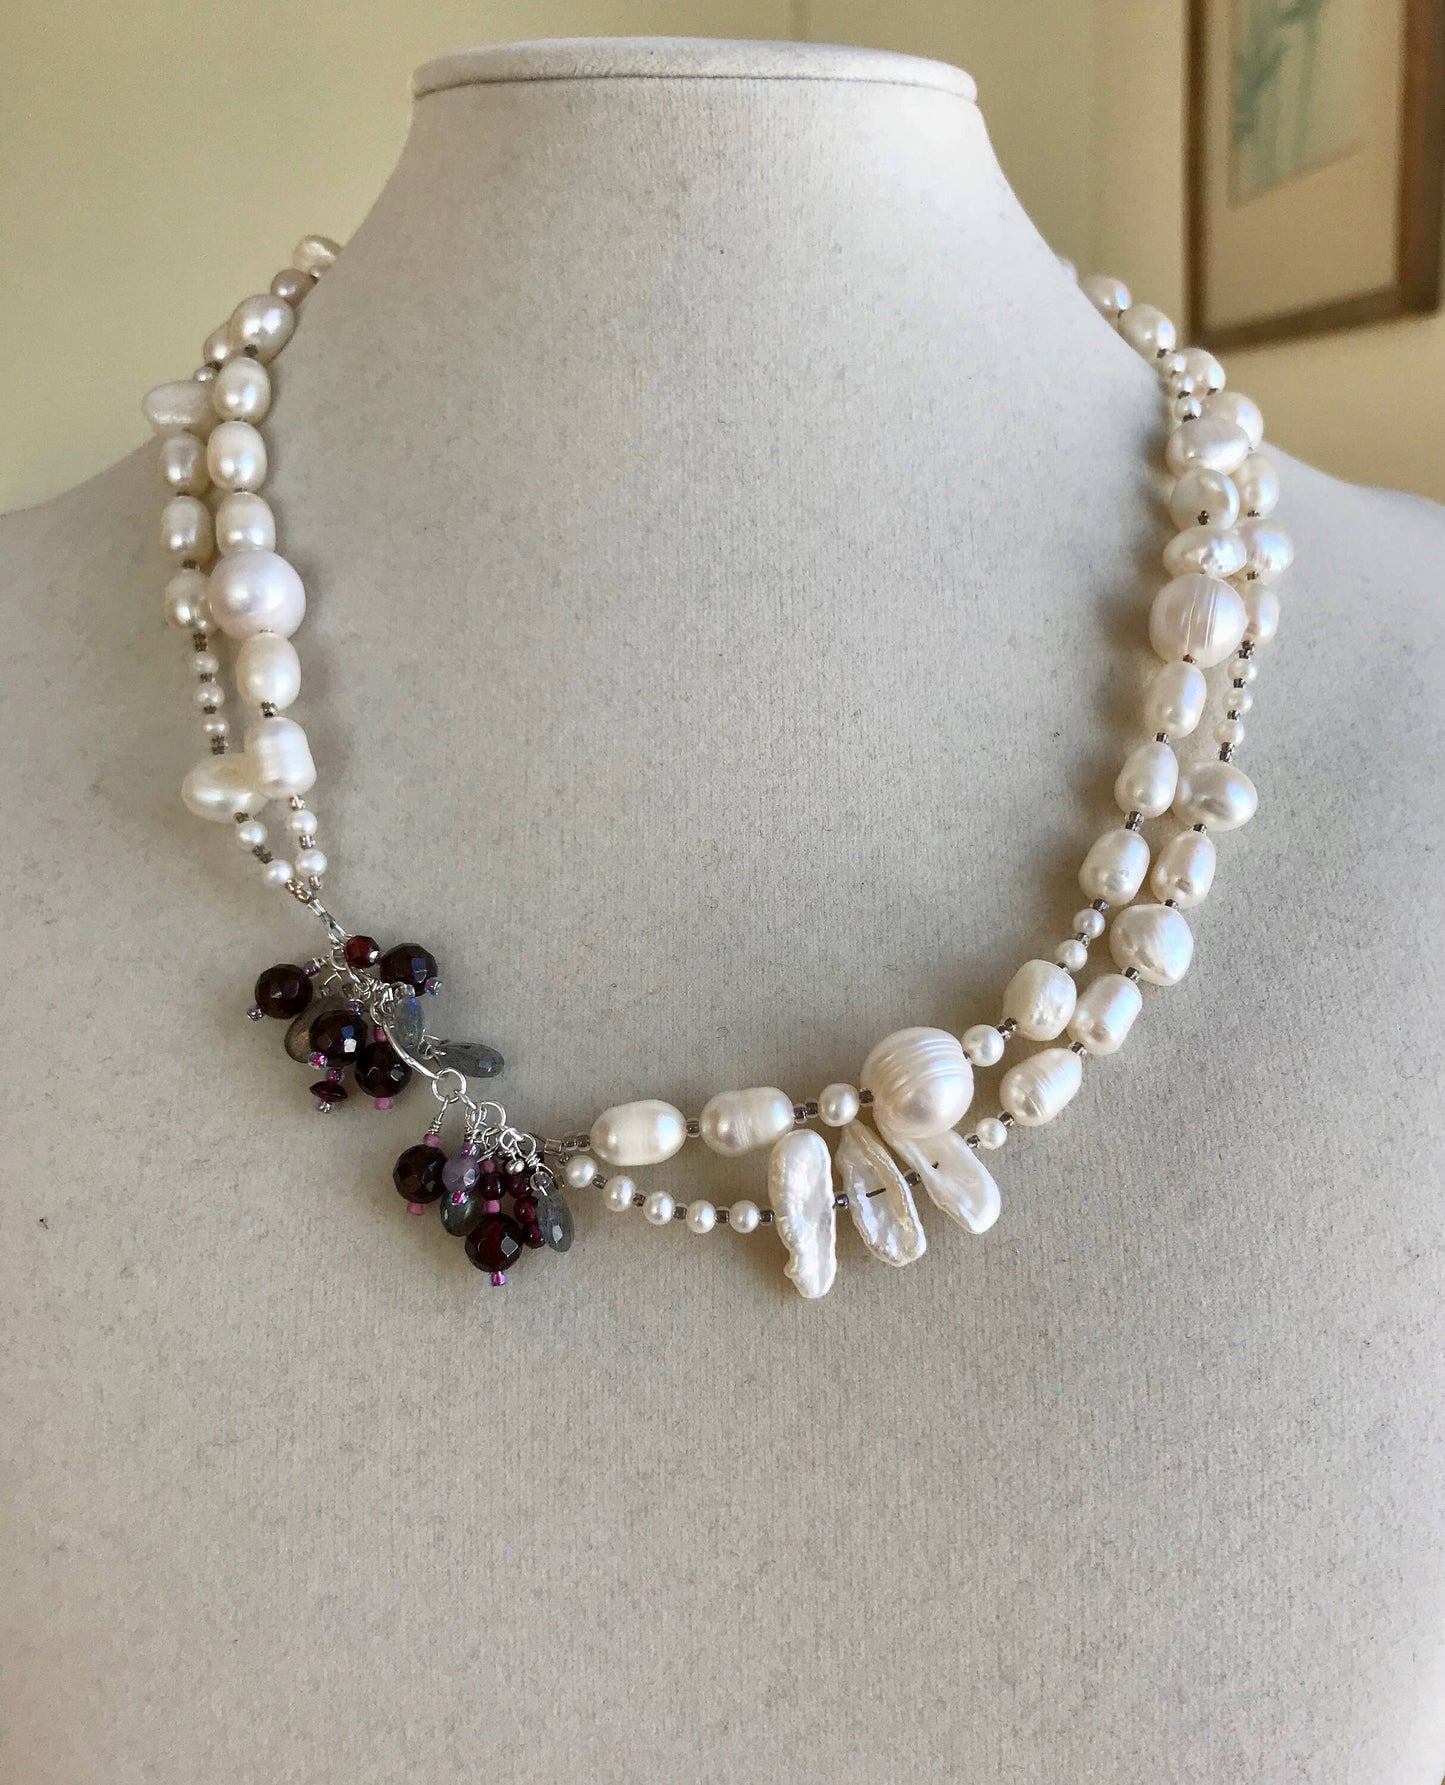 Pearls. Beautiful knotted fresh water pearl and garnet embellished necklace. The necklace is finished with a filigree gold clasp.